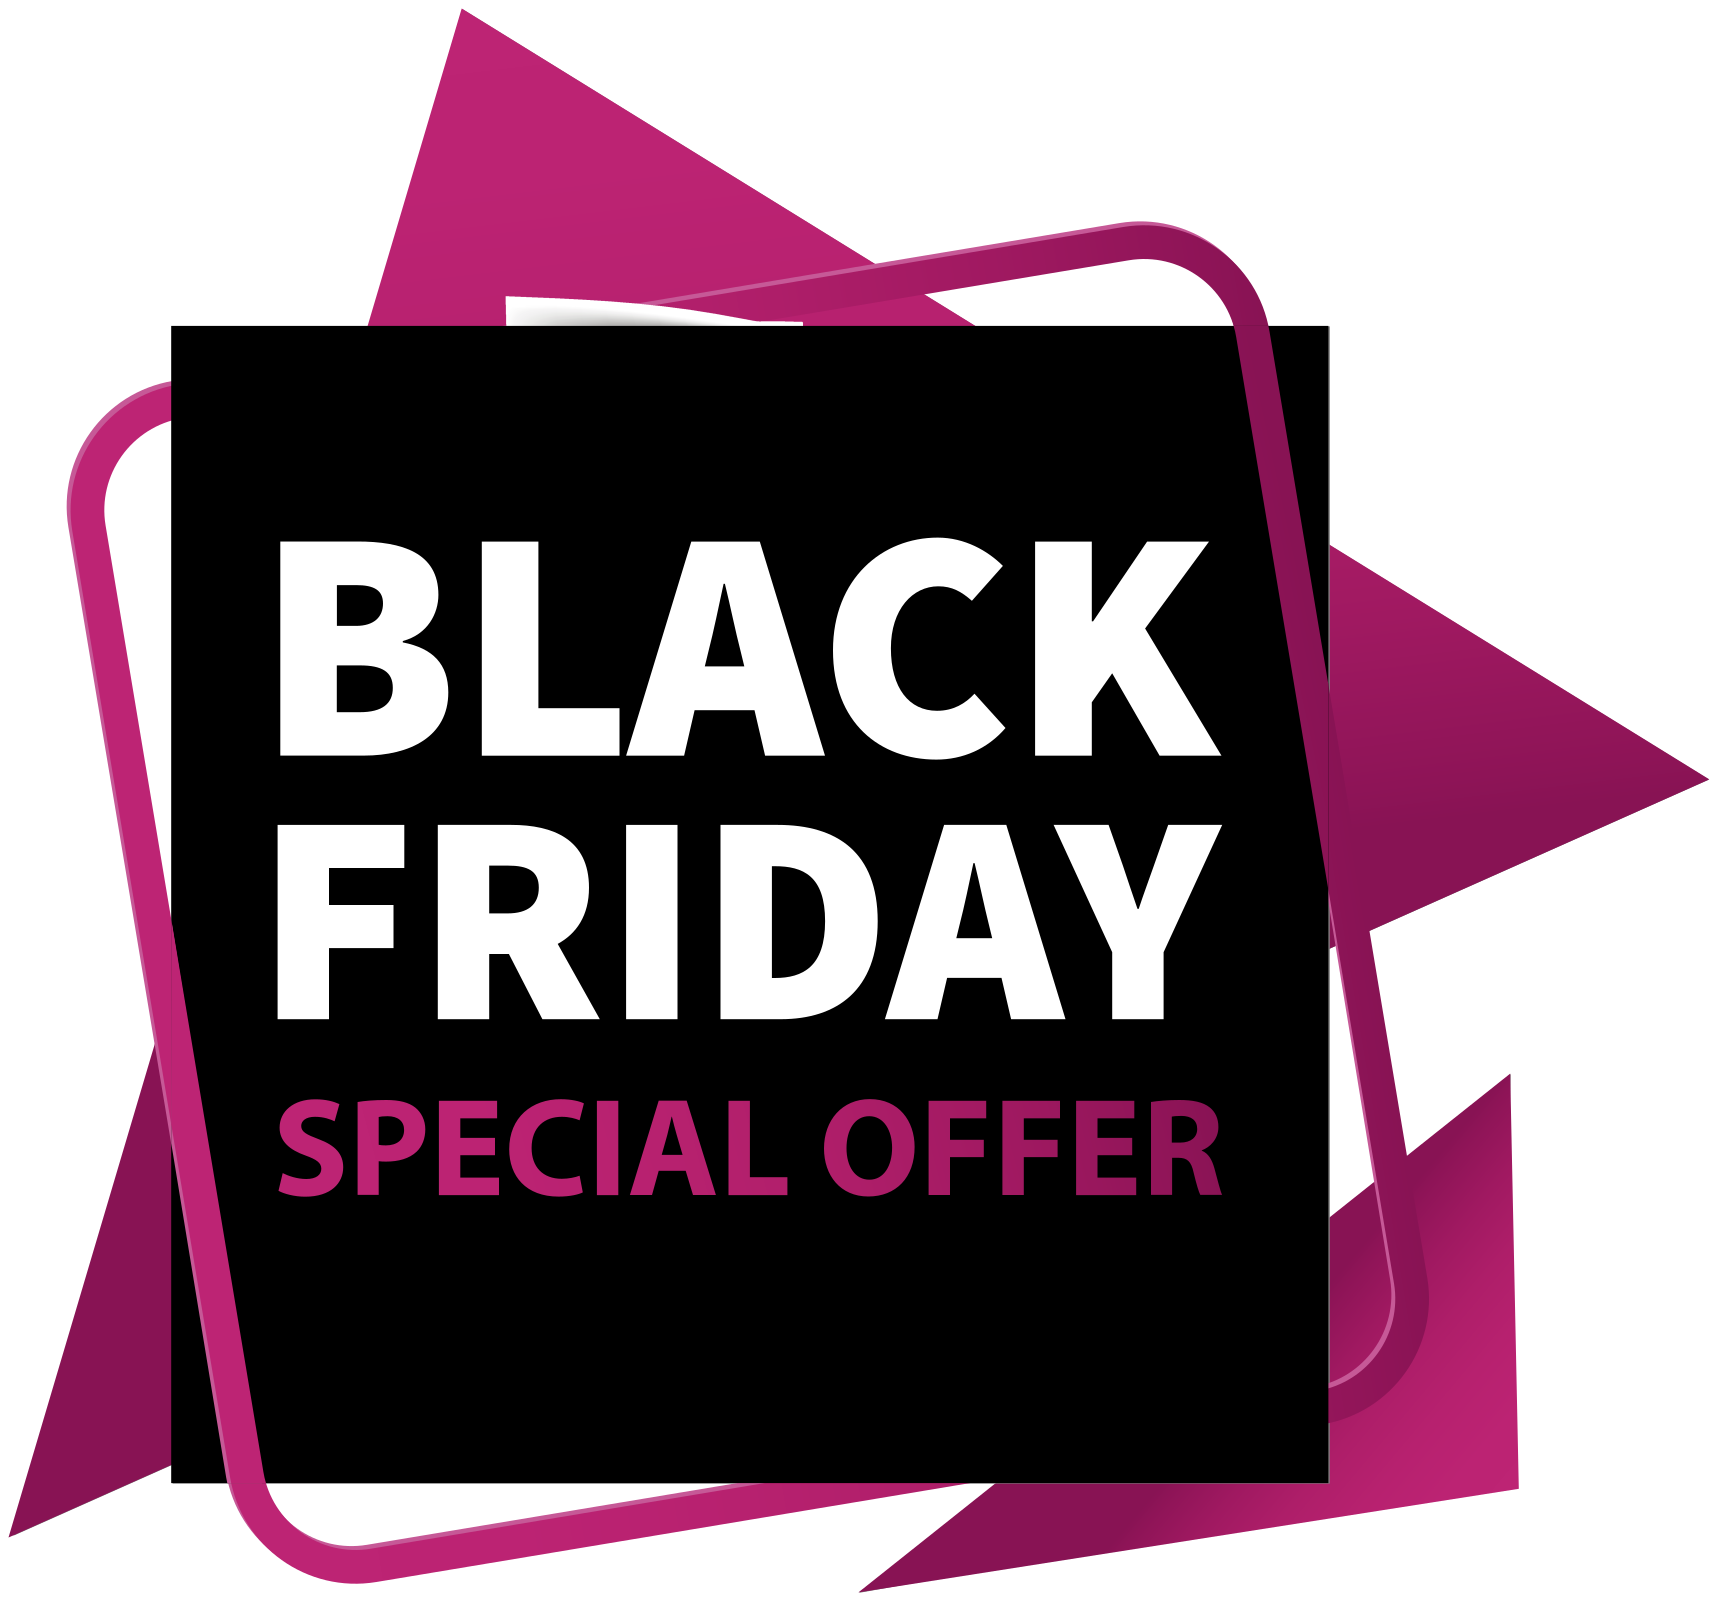 special offer black friday window decal TenStickers